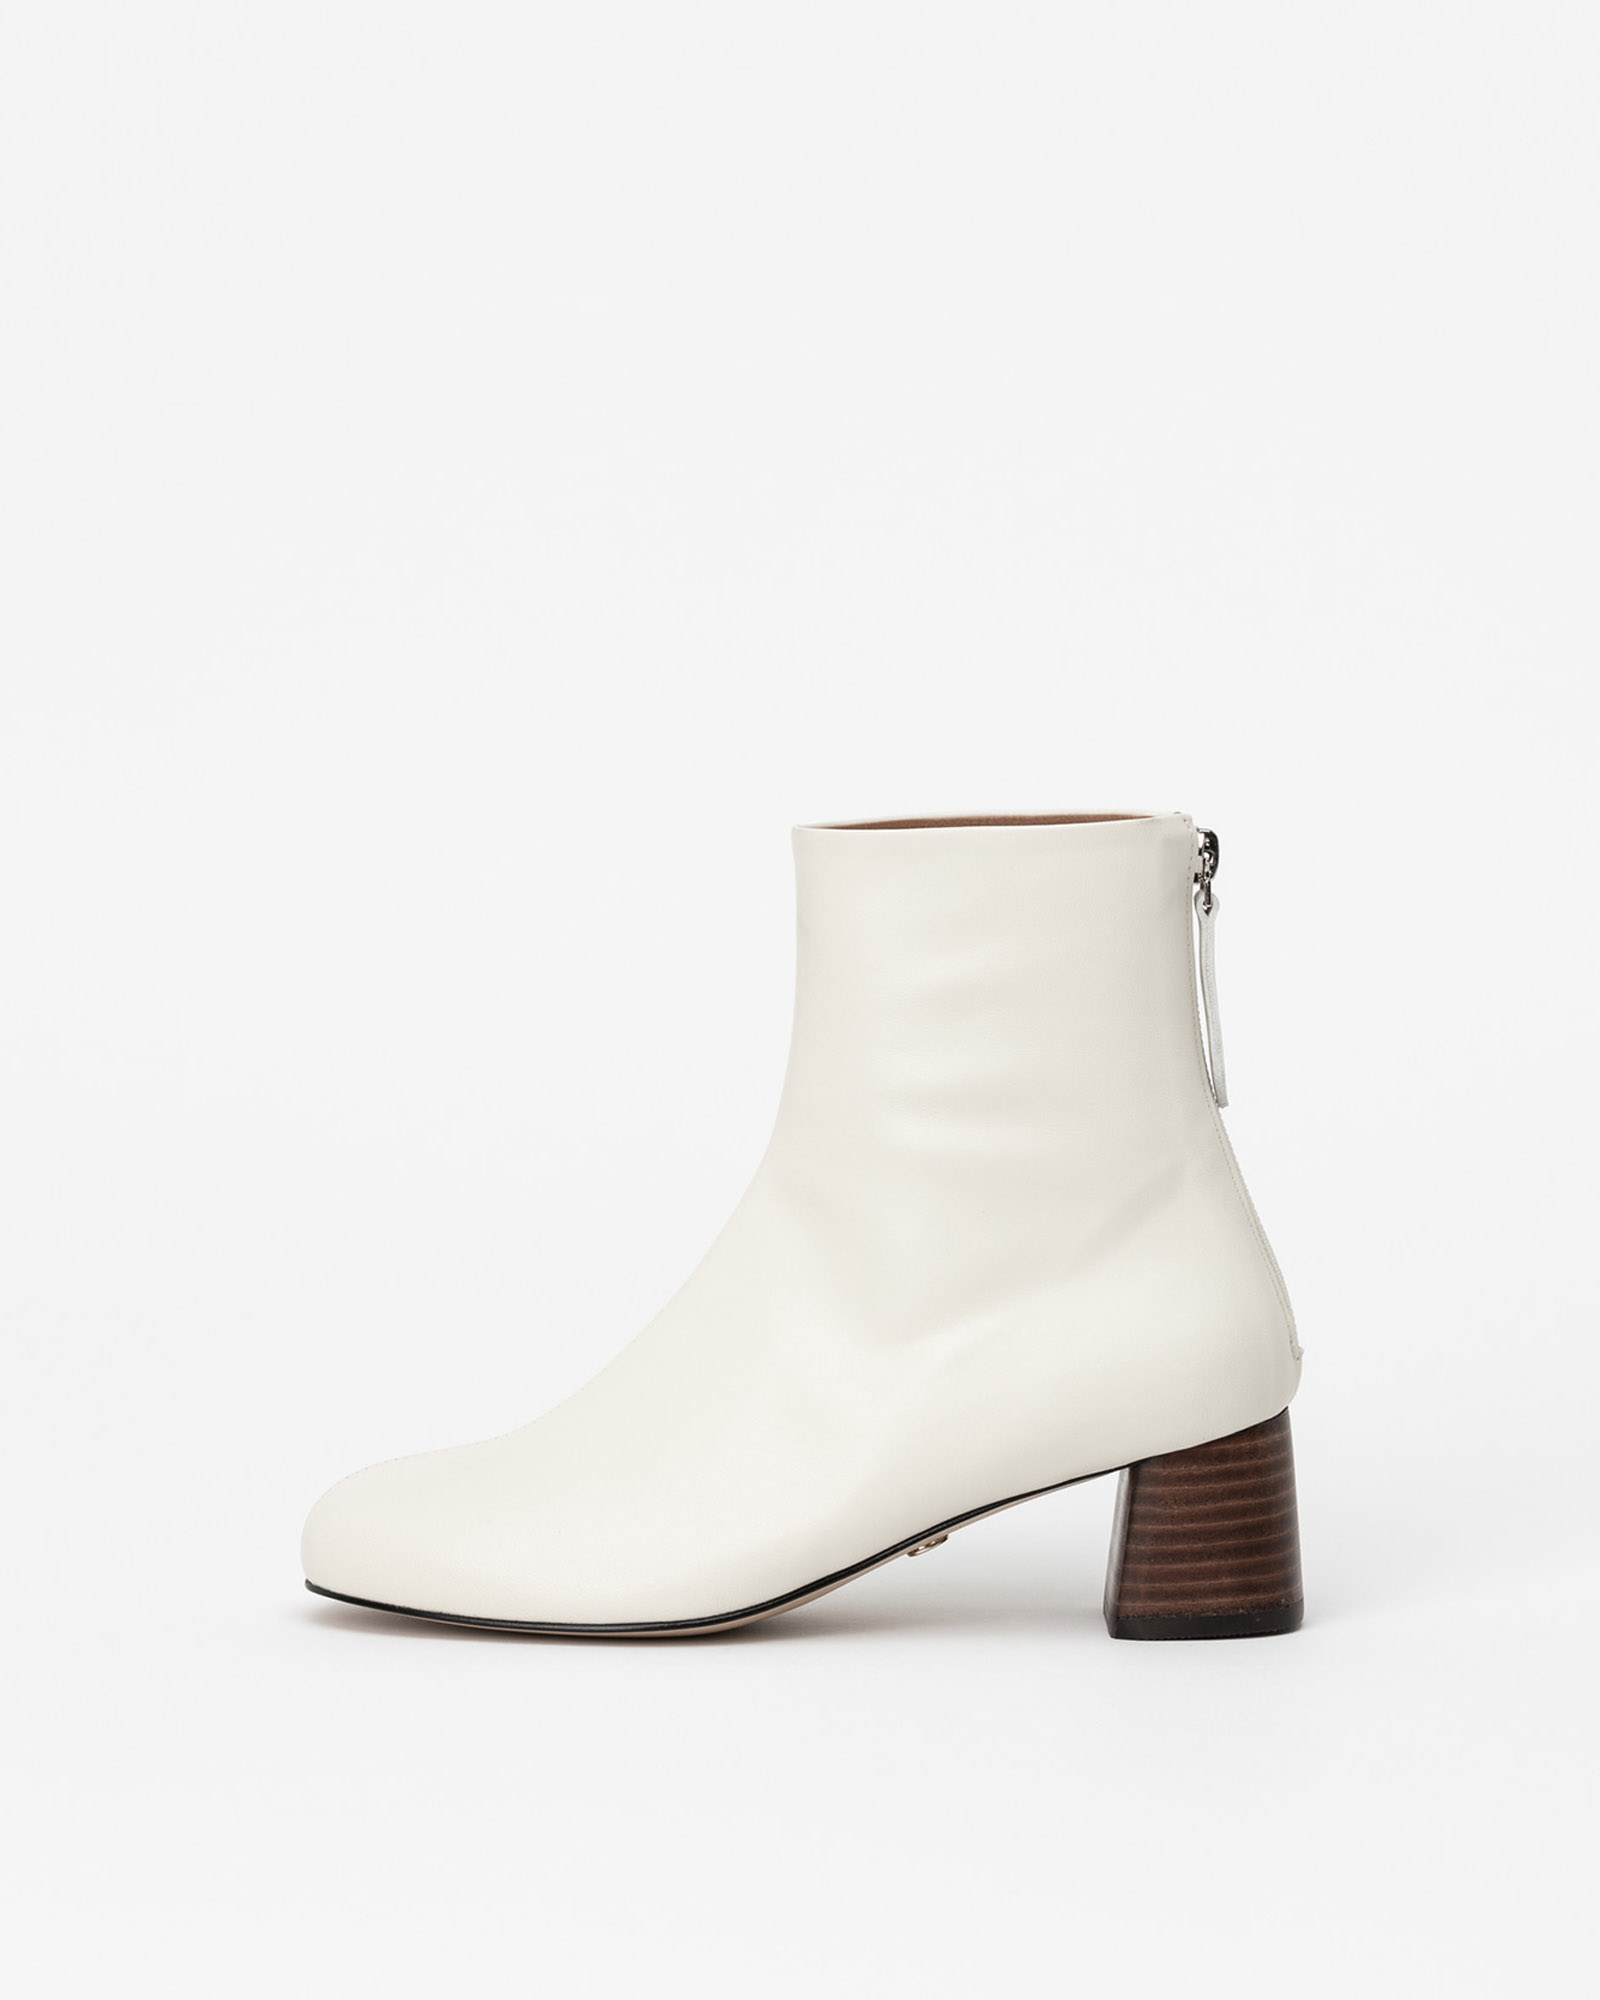 Duena Boots in Ivory